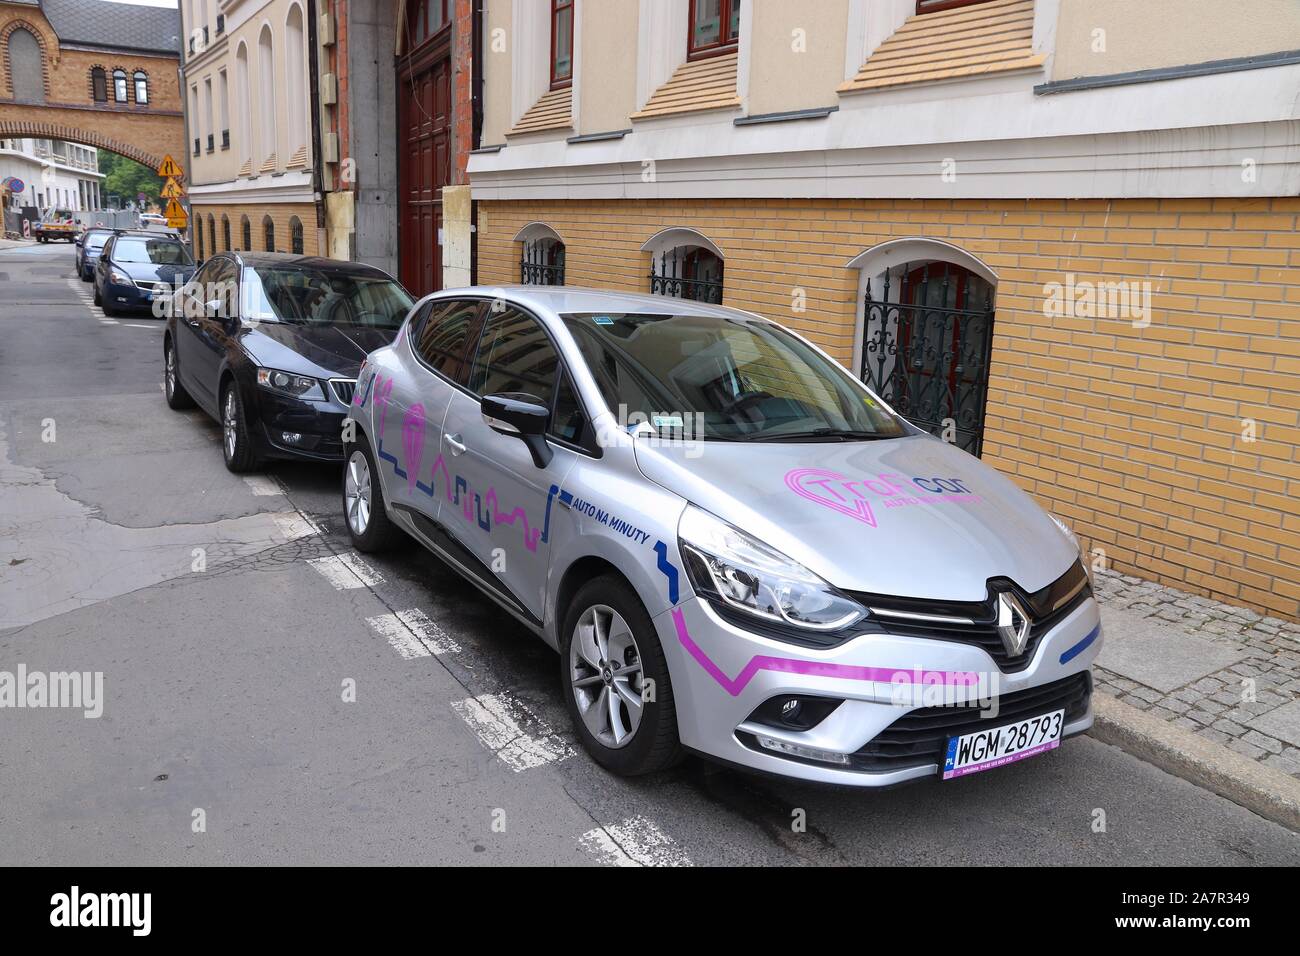 WROCLAW, POLAND - MAY 11, 2018: Traficar vehicle in Wroclaw, Poland. Traficar is a car sharing company with more than 1,100 vehicles. Stock Photo